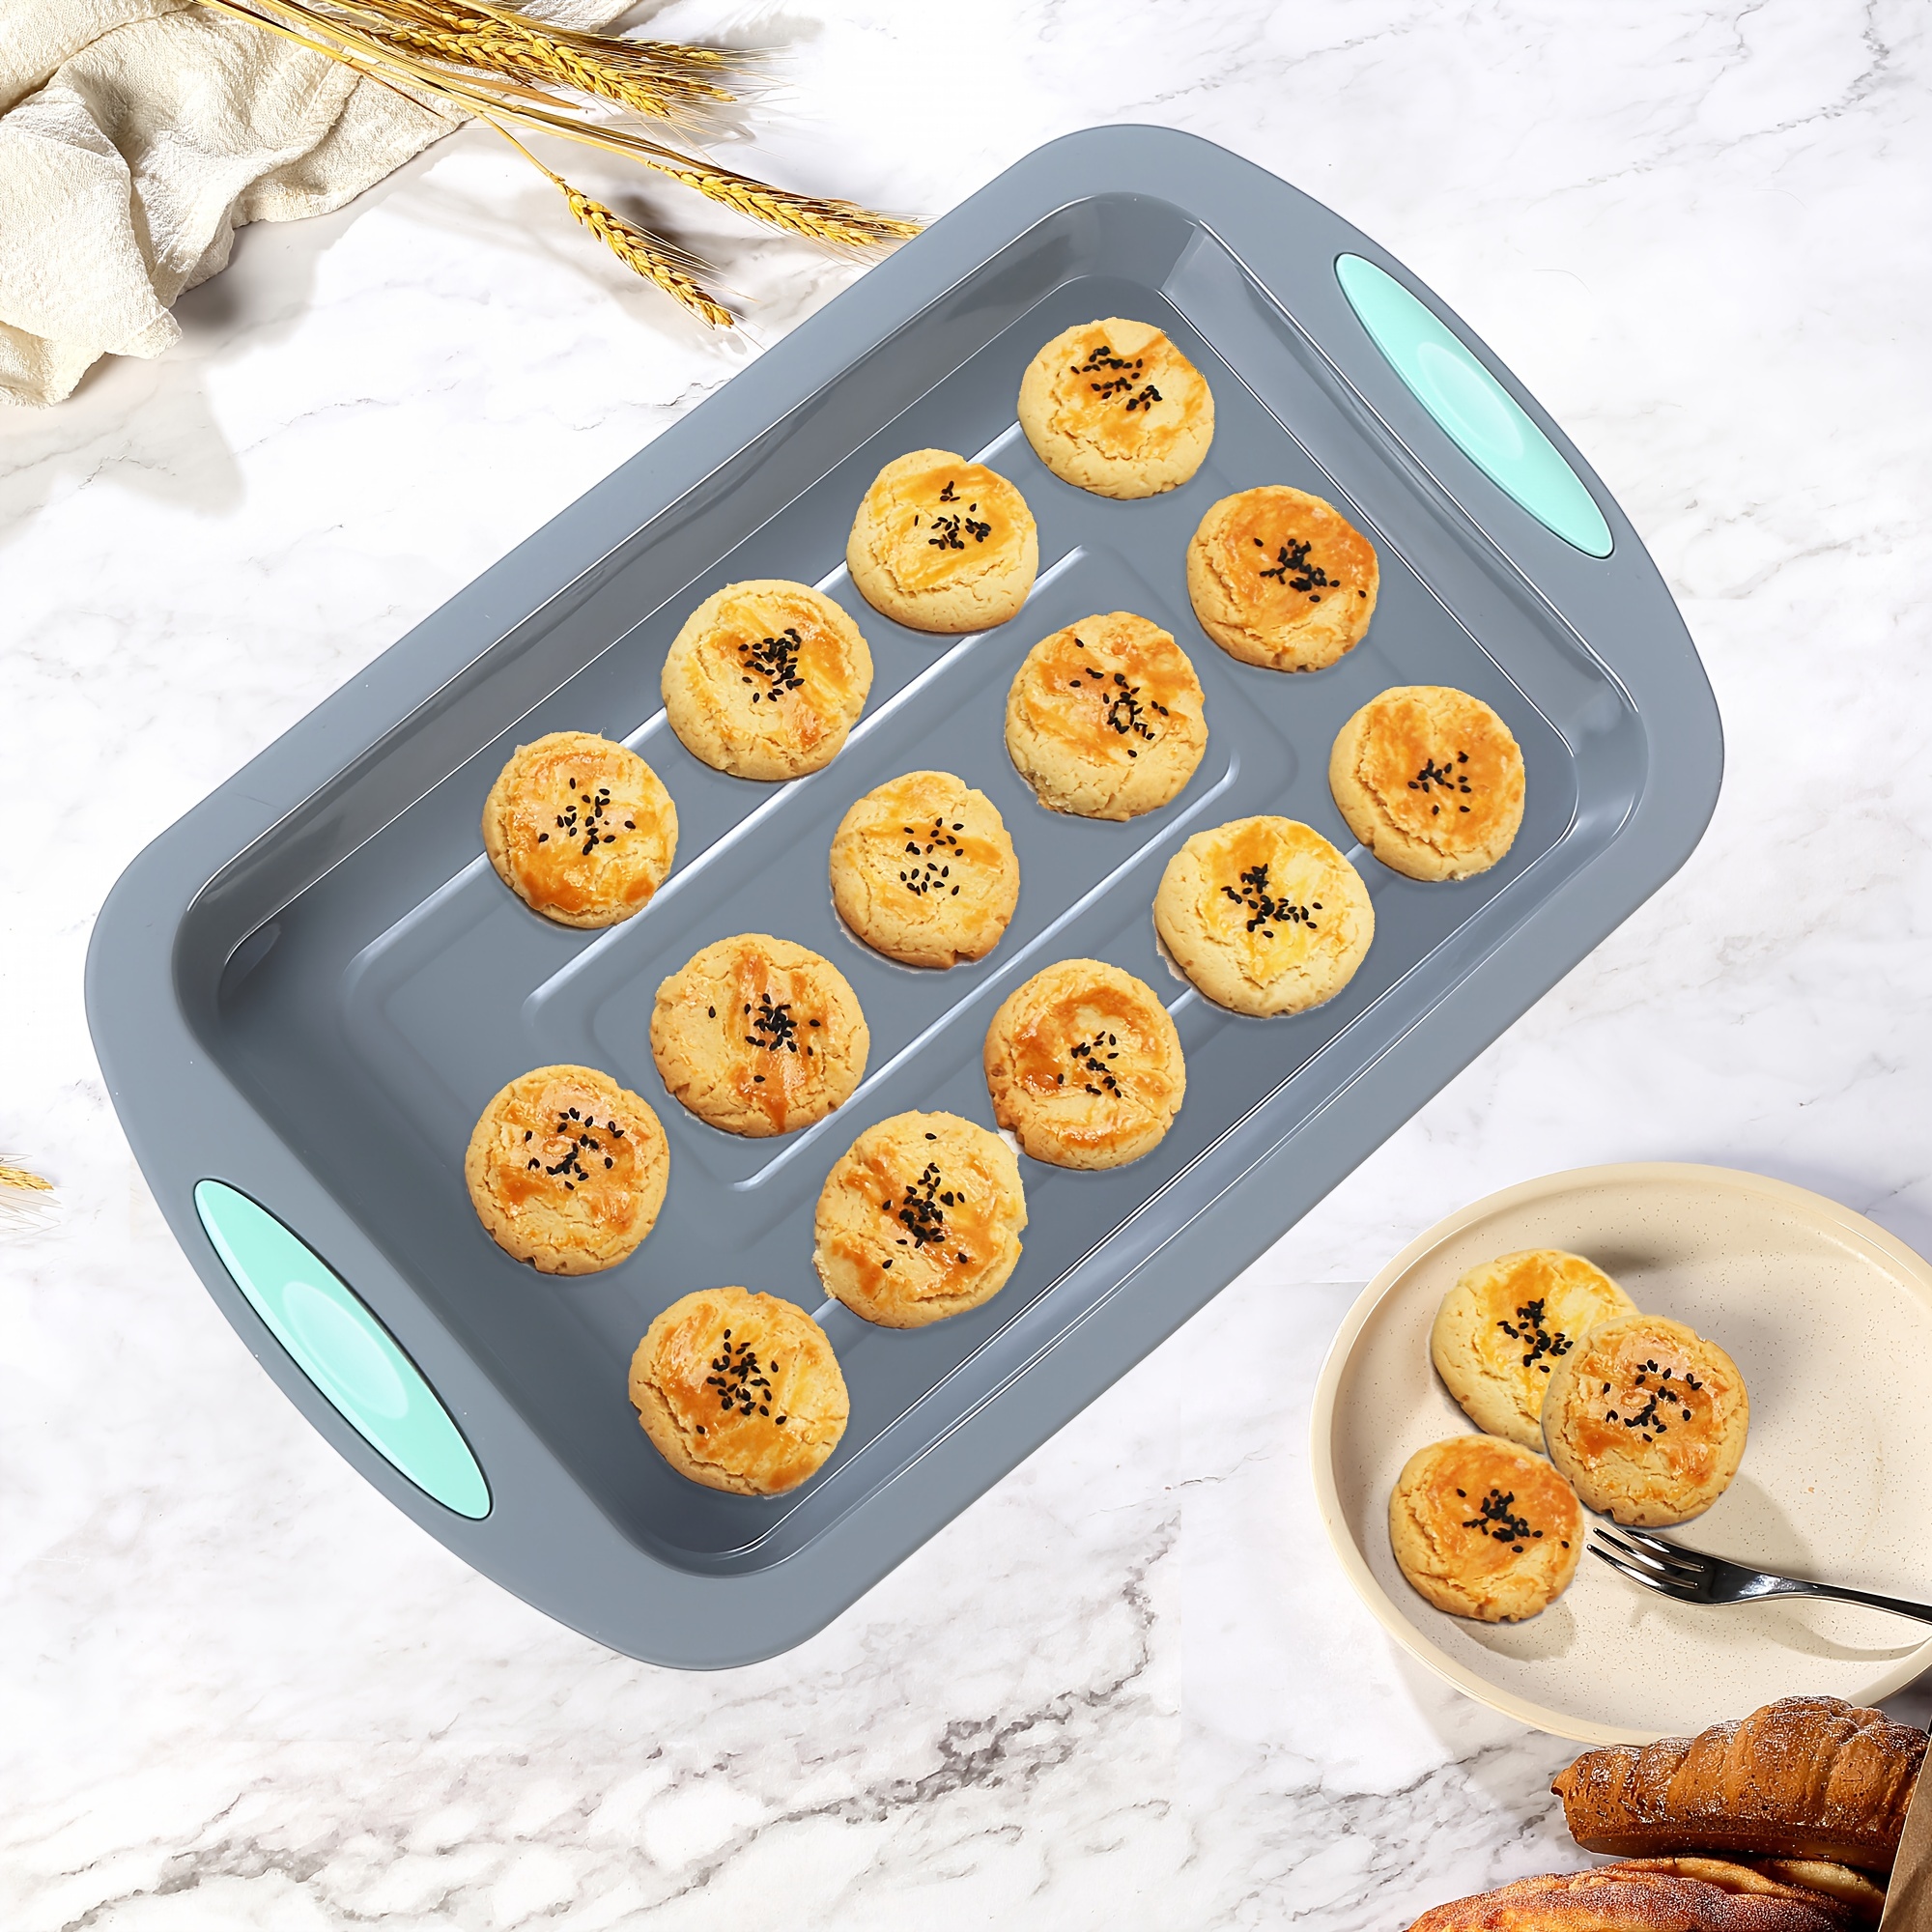  To encounter 41 Pieces Silicone Baking Pan Set, Silicone Cake  Molds, Baking Sheet, Donut Pan, Silicone Muffin Pan with 36 Pack Silicone  Baking Cups, Dishwasher Safe: Home & Kitchen